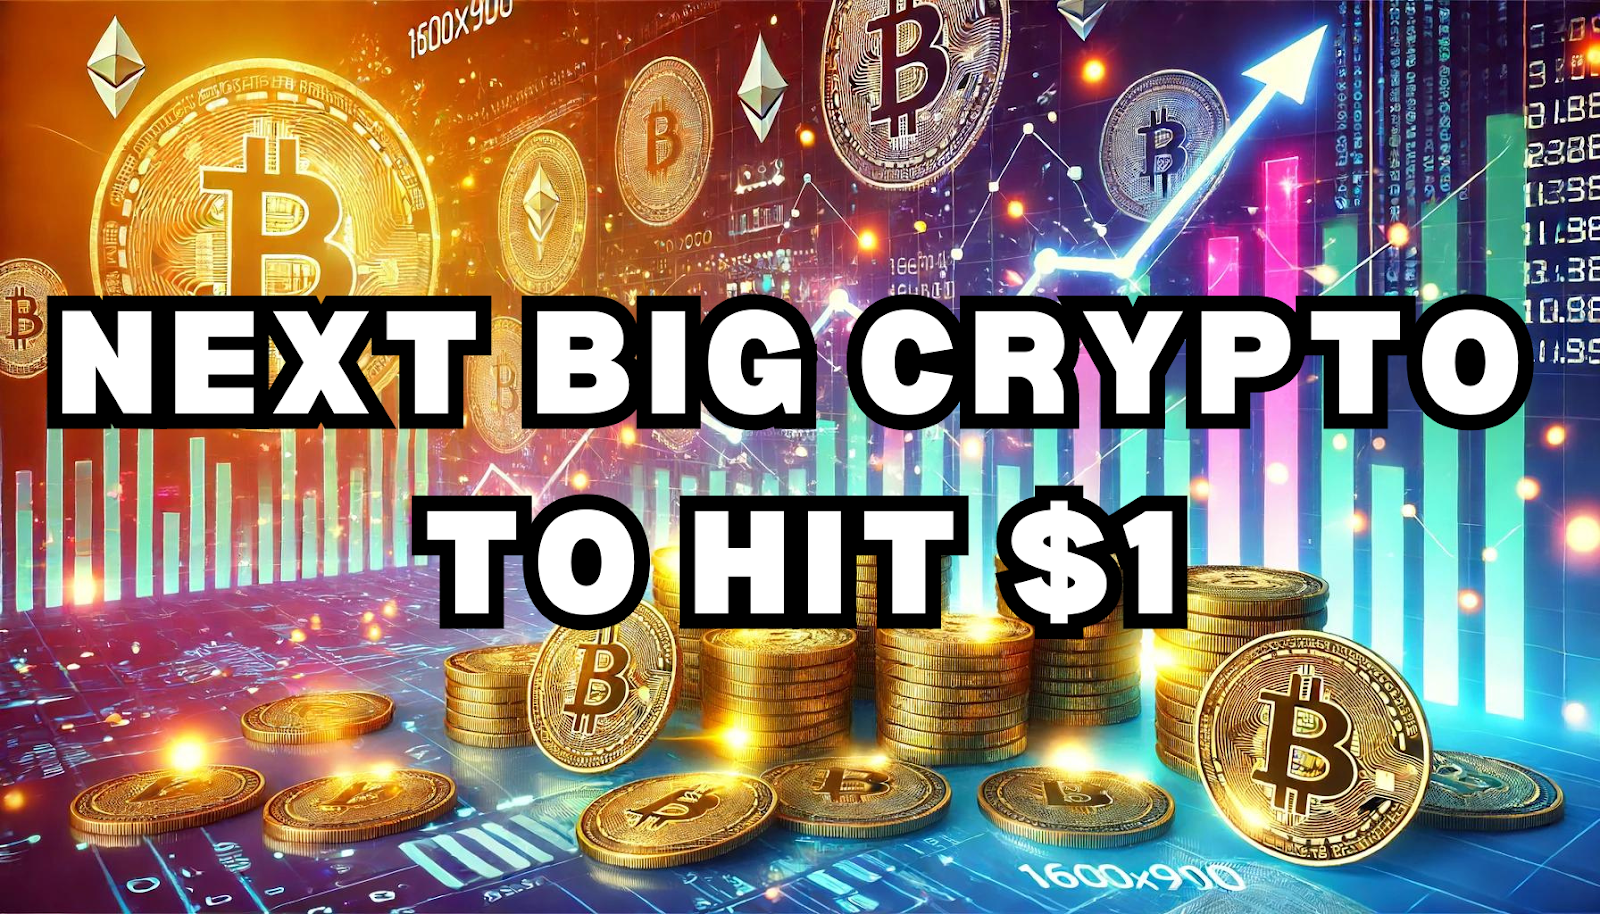 5 Best Penny Cryptocurrency To Buy - Which Crypto Coins Could Hit 1 Dollar? 